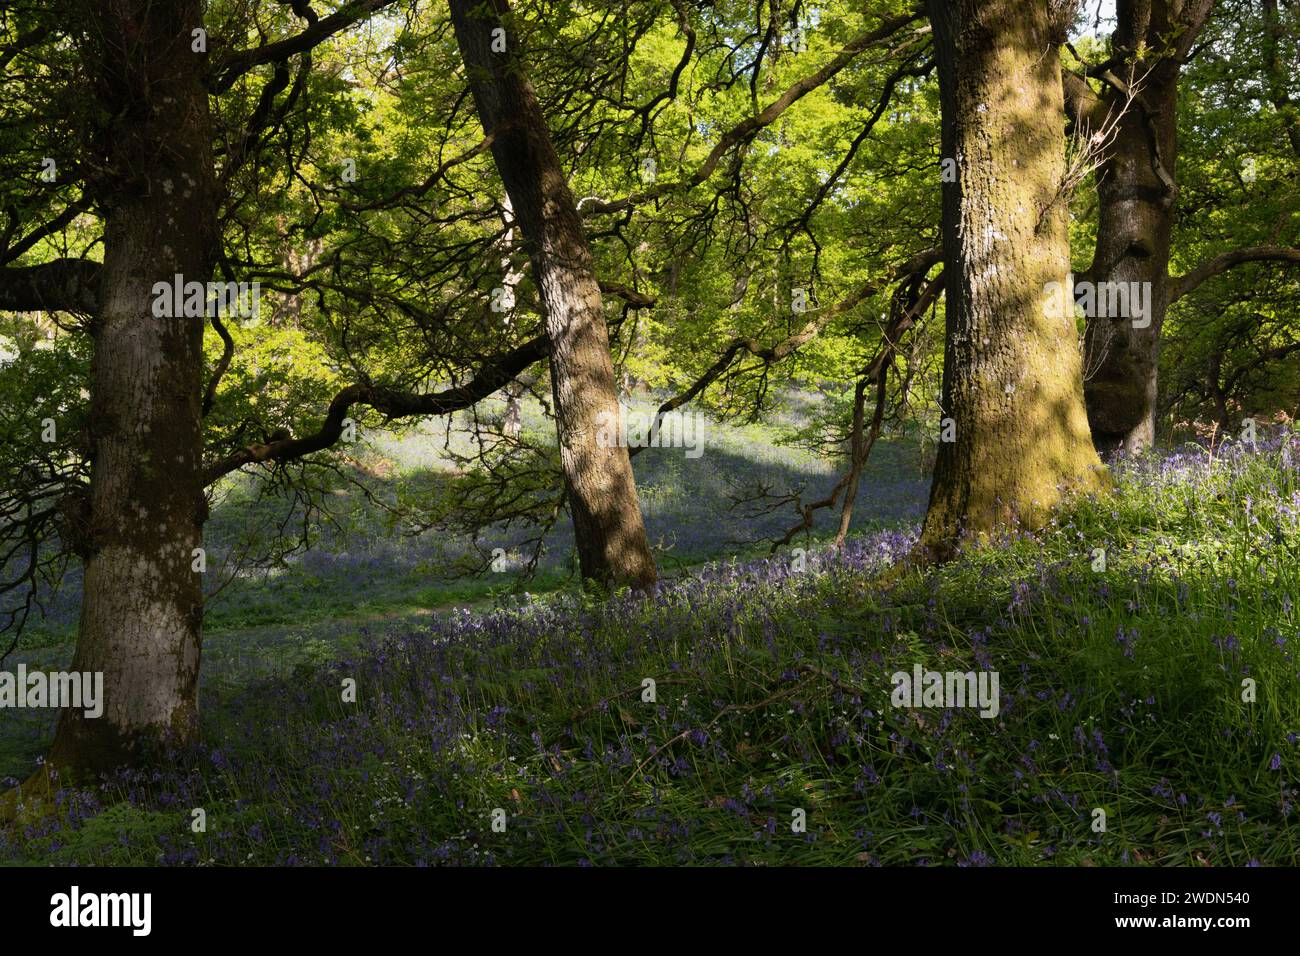 A Secluded Hollow, or Dell, Covered with Native Bluebells (Hyacinthoides Non-scripta) in the Ancient Oak Woodland at Kinclaven Bluebell Woods Stock Photo